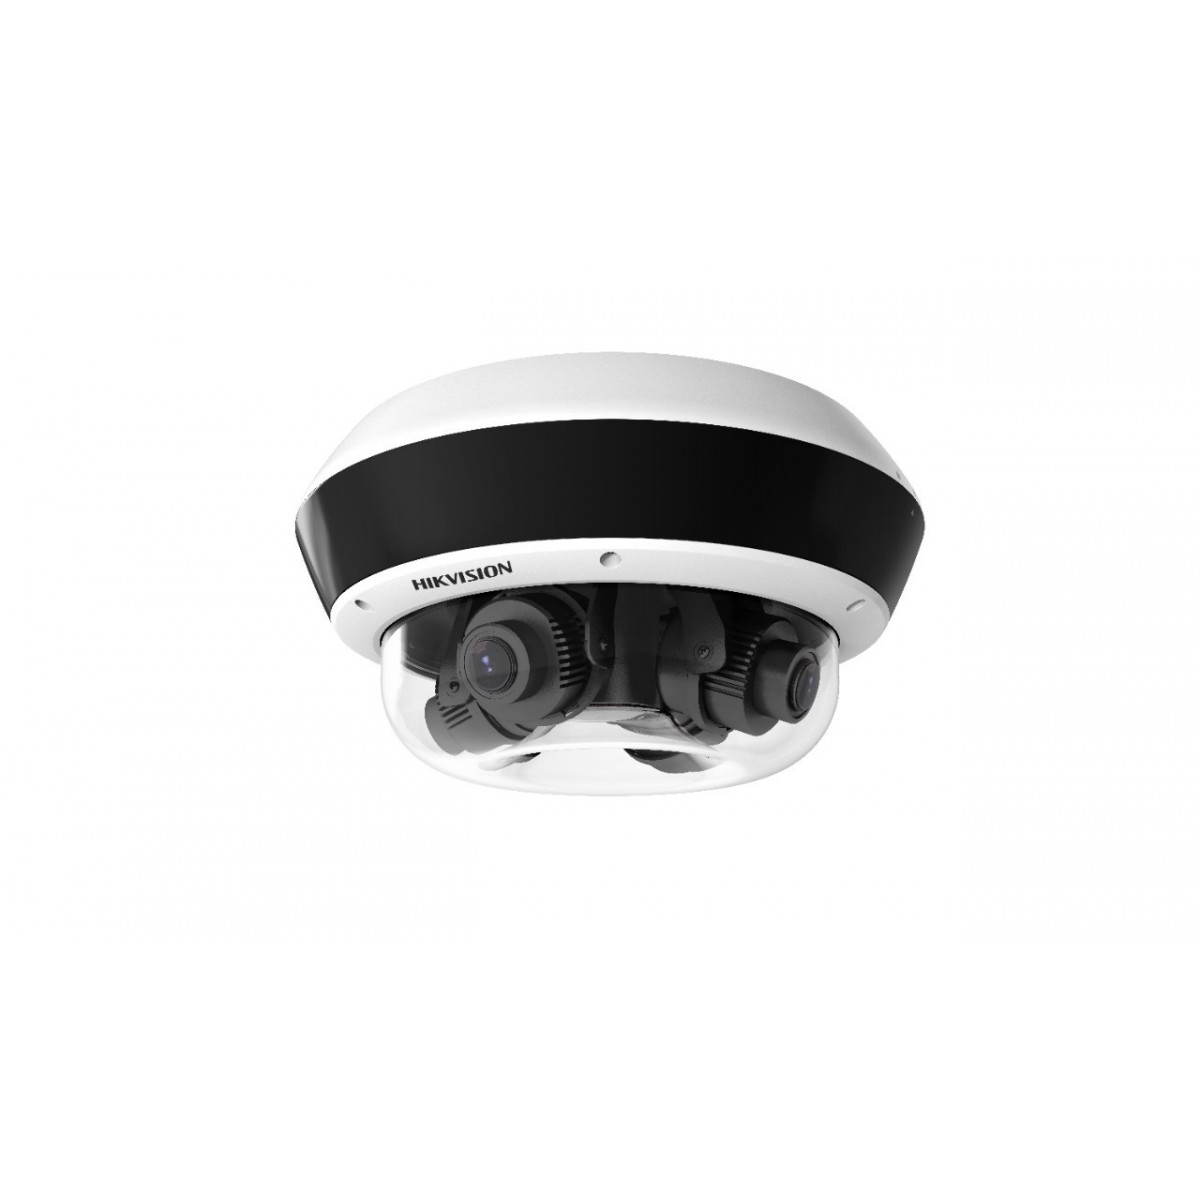 Hikvision Digital Technology DS-2CD6D24FWD-IZHS - IP security camera - Outdoor - Wired - Dome - Ceiling - Black - White